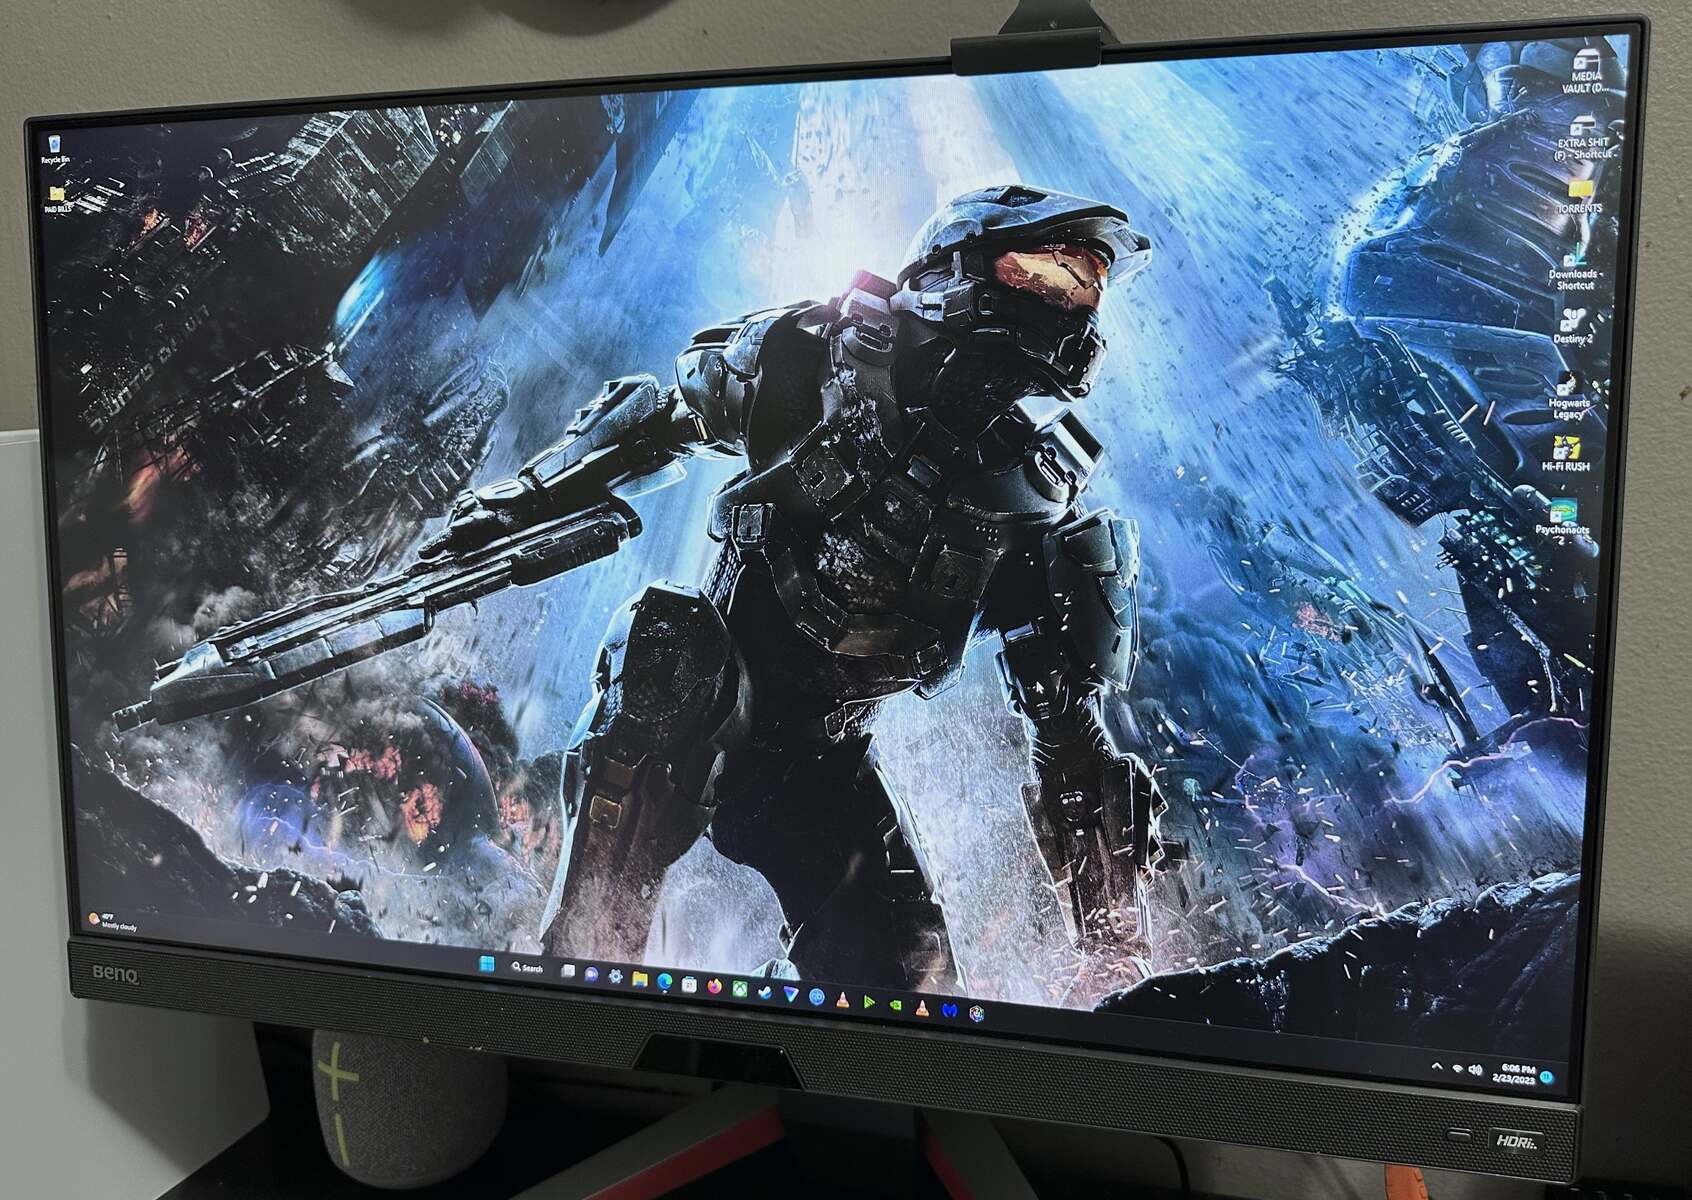 How To Adjust The Color On A Gaming Monitor